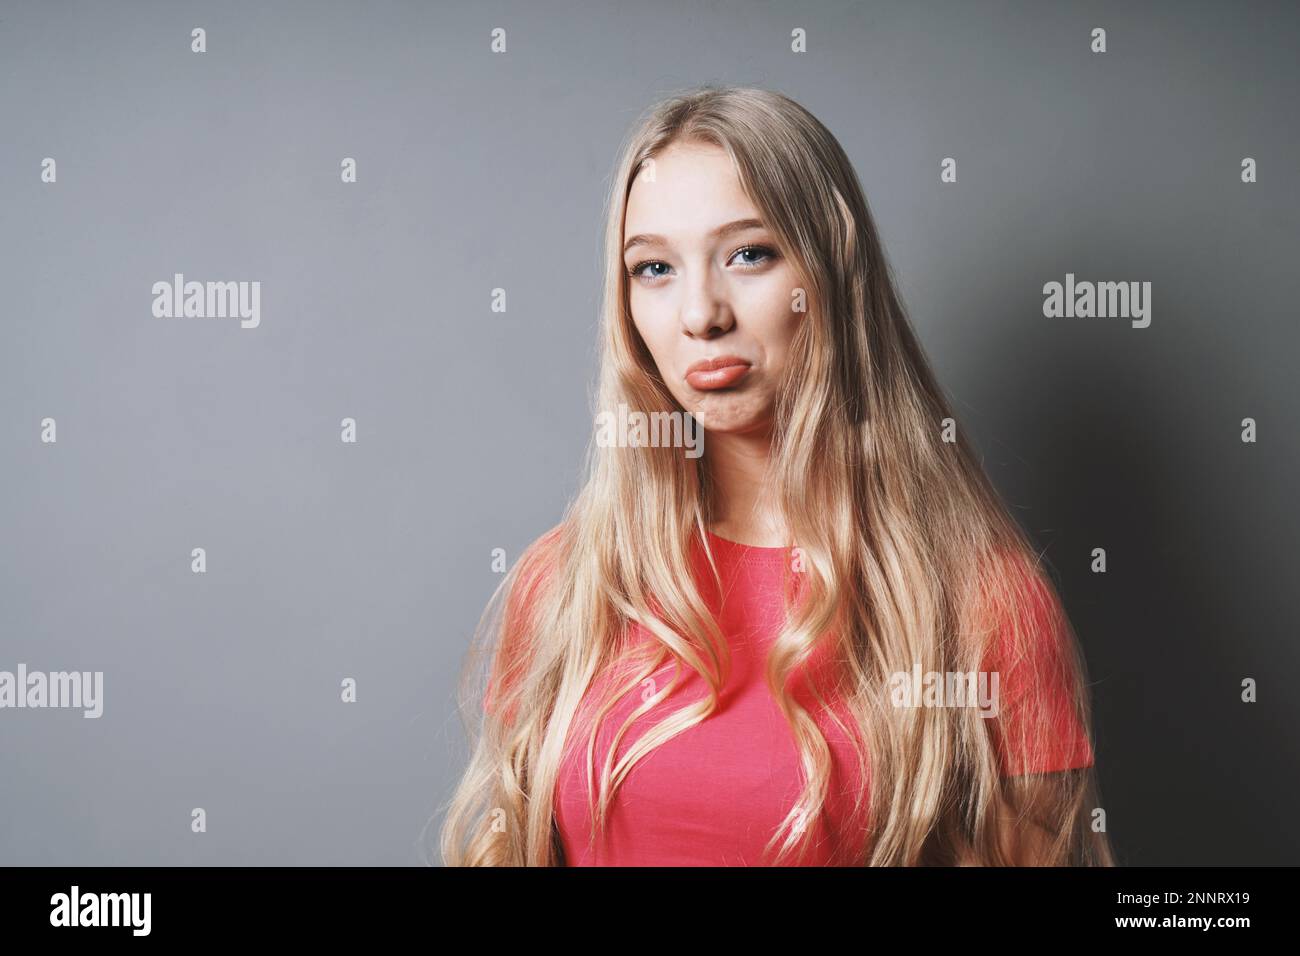 sulky pouty teenage girl pursing her lips - adolescence concept - gray background with copy space Stock Photo